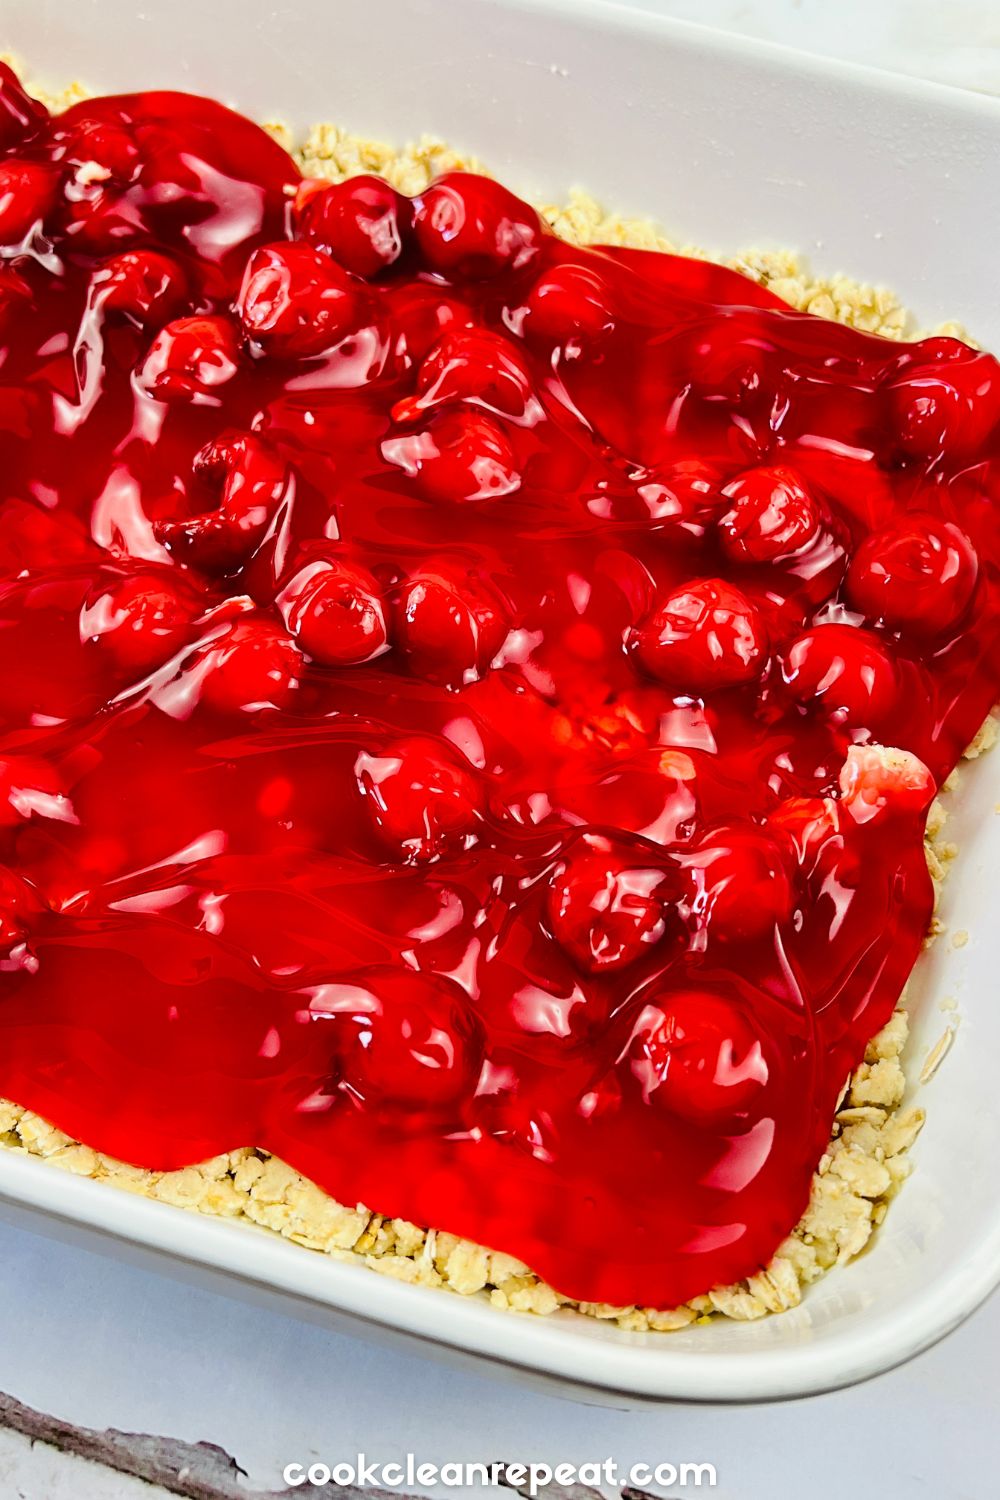 canned cherry pie filling on top of oats in a baking dish